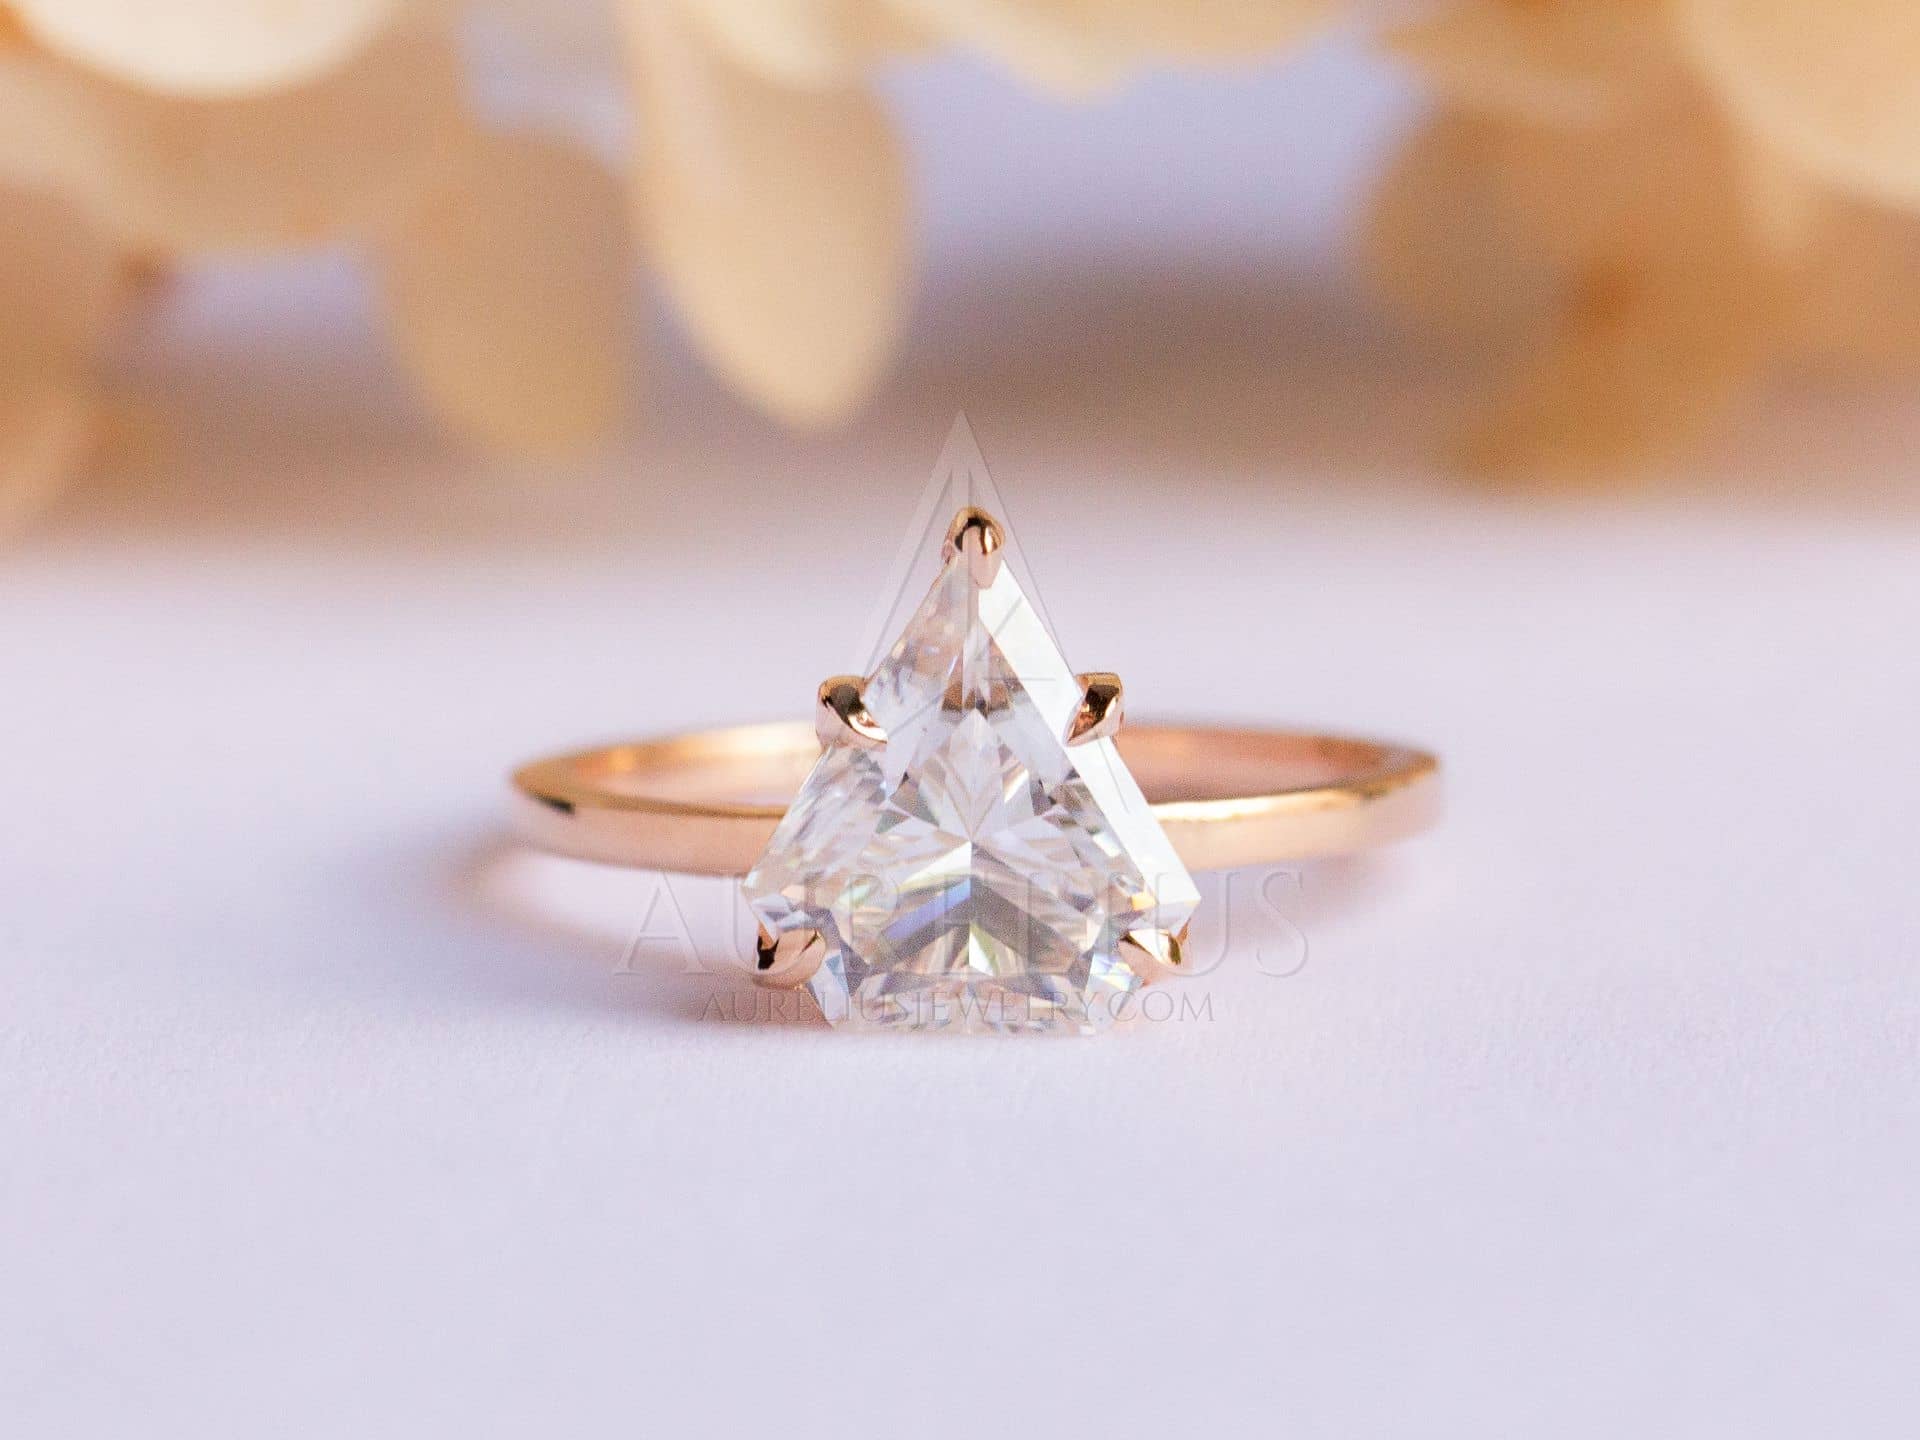 Shield Diamond Ring, Unique Engagement Ring, 14K / 18K Yellow Gold,  Triangle Diamond Ring, Unique Diamond Ring, Art Deco, Solitaire Ring - Etsy